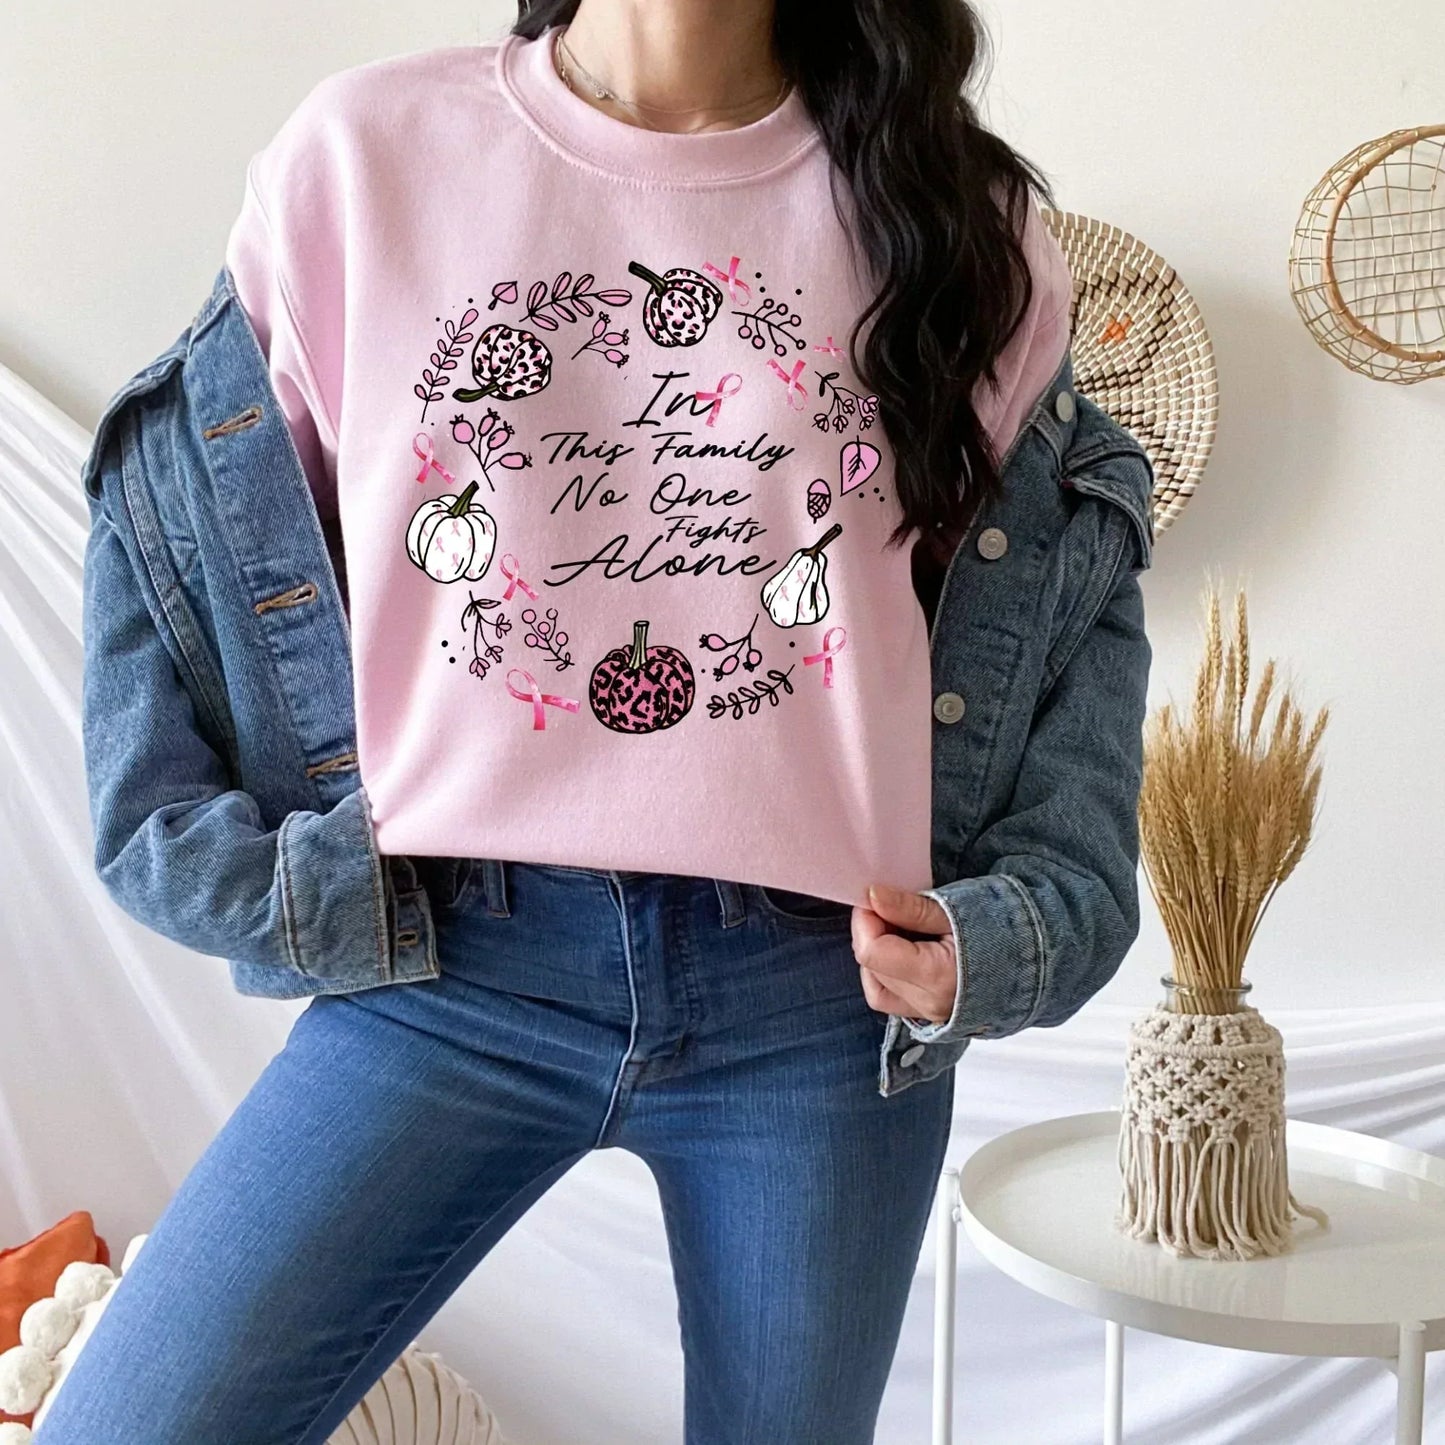 Breast Cancer Shirt, Never Give Up, Cancer Survivor Gifts, Stronger than Cancer Sweatshirt, Support Awareness Month, Pink Ribbon Hoodie HMDesignStudioUS